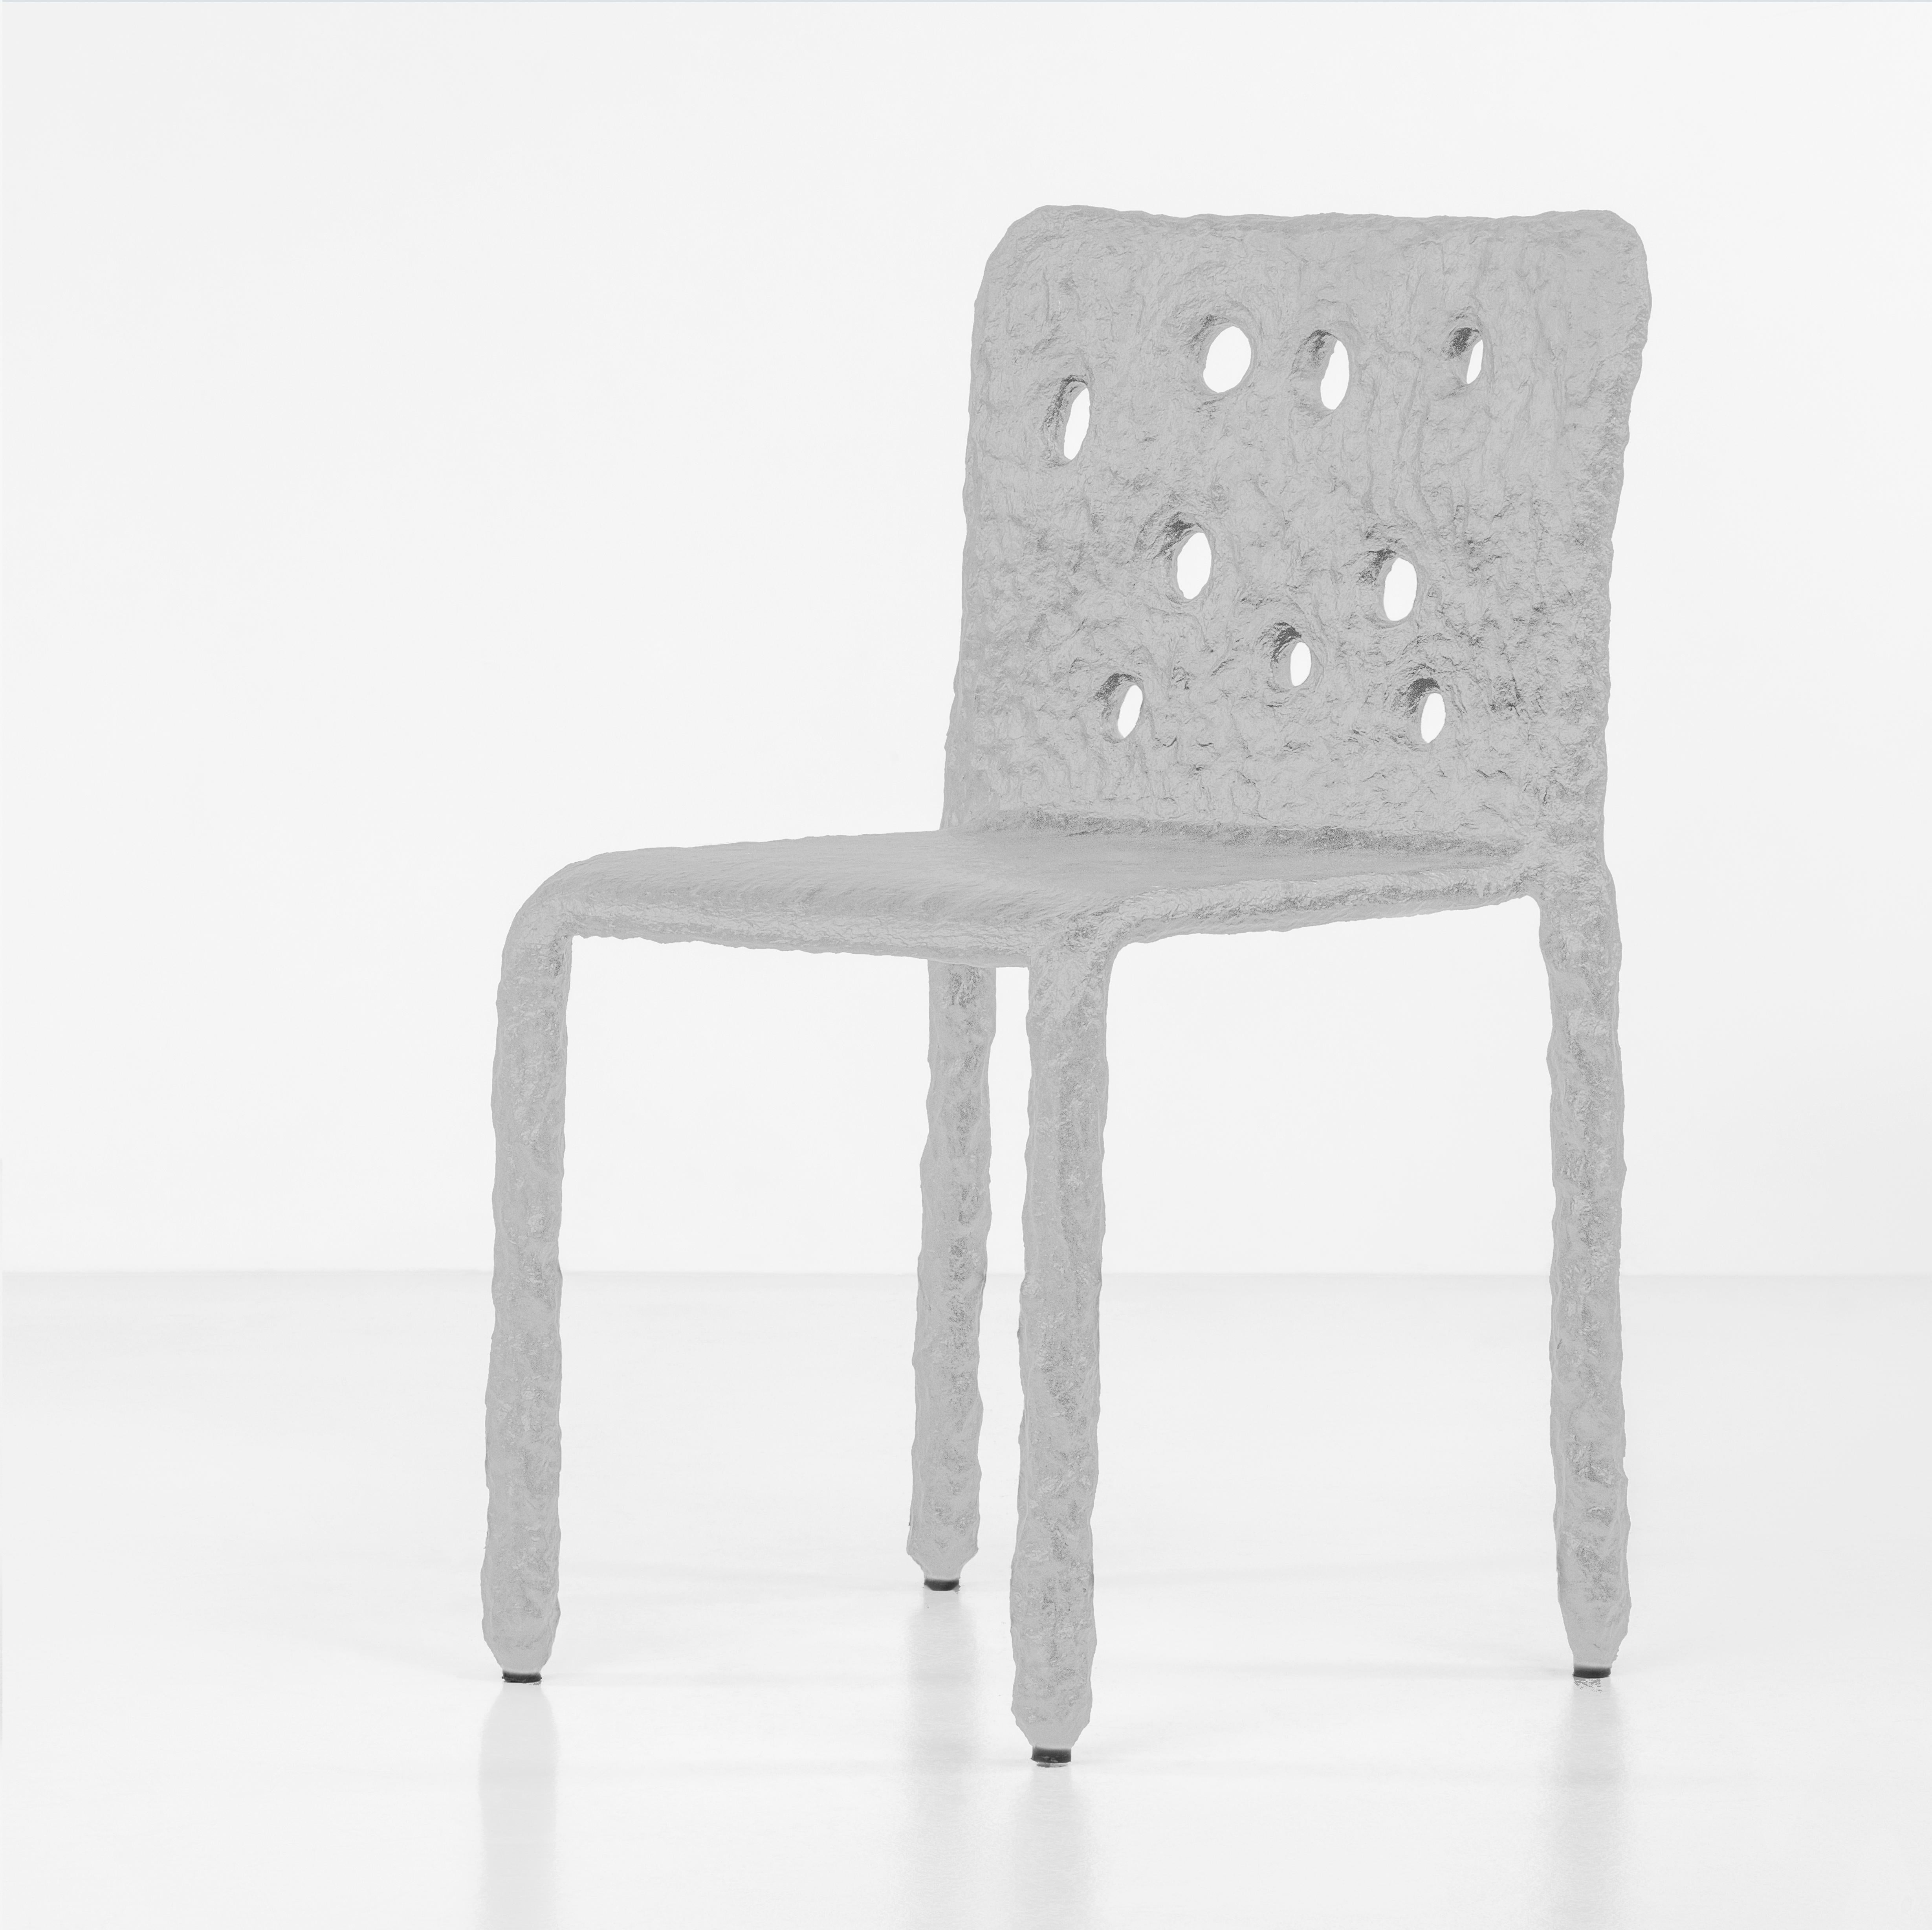 Sculpted Indoor Contemporary Chair by FAINA 2